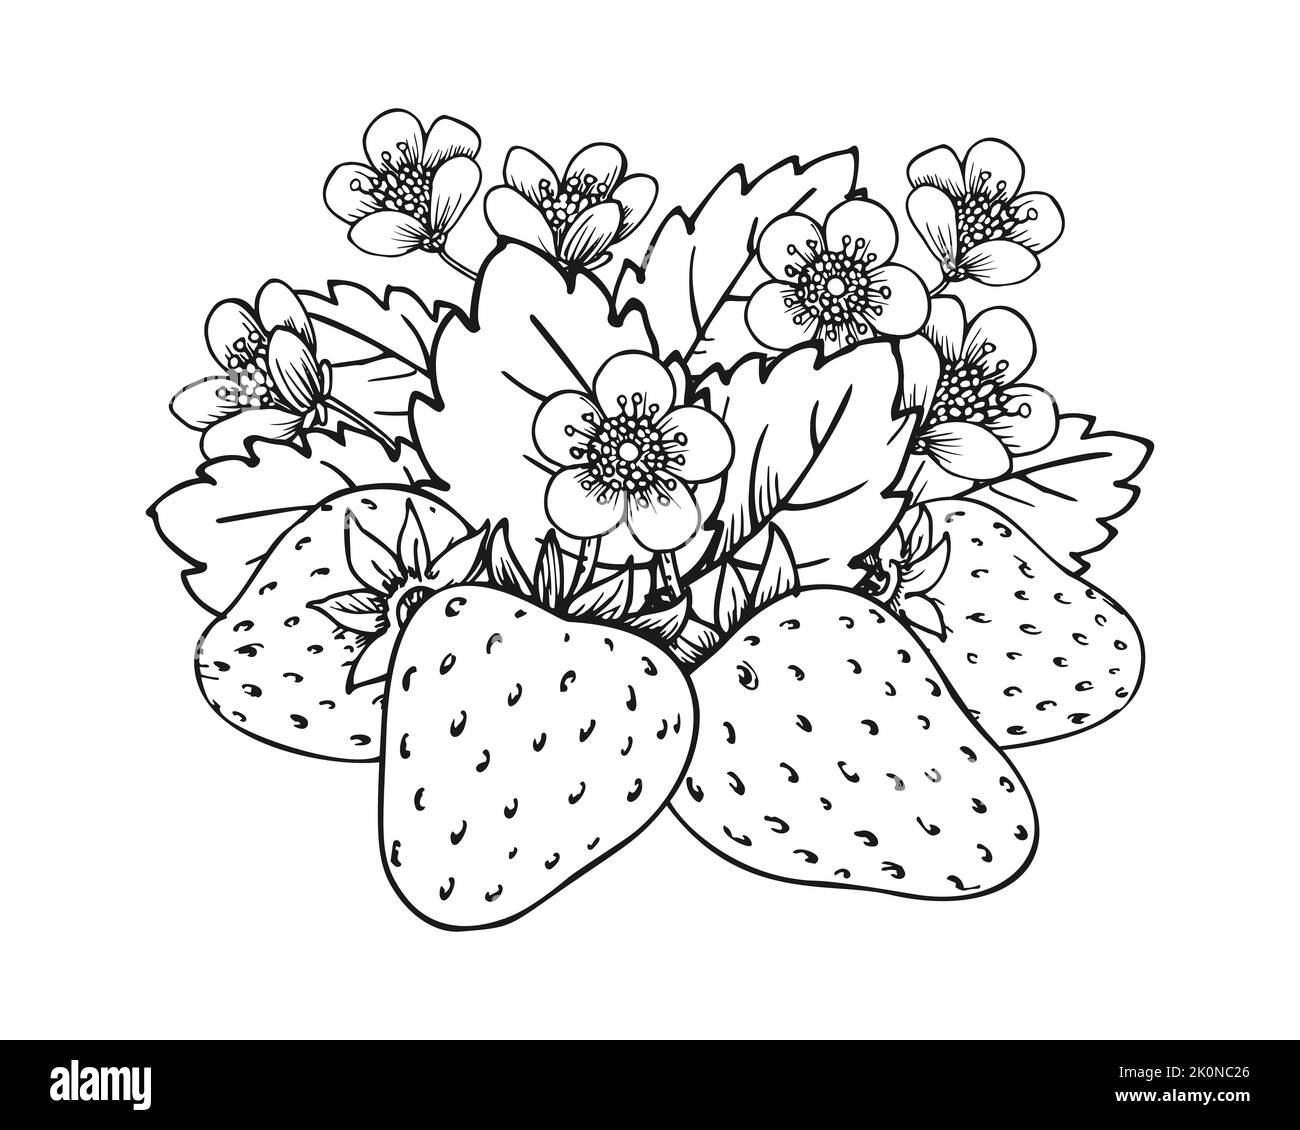 Sweet strawberry hand drawn sketch. Forest berries bundle. Coloring book line art of healthy fresh farm organic berry harvest. Blossom bush with juicy strawberries, flowers and leaves closeup Stock Vector